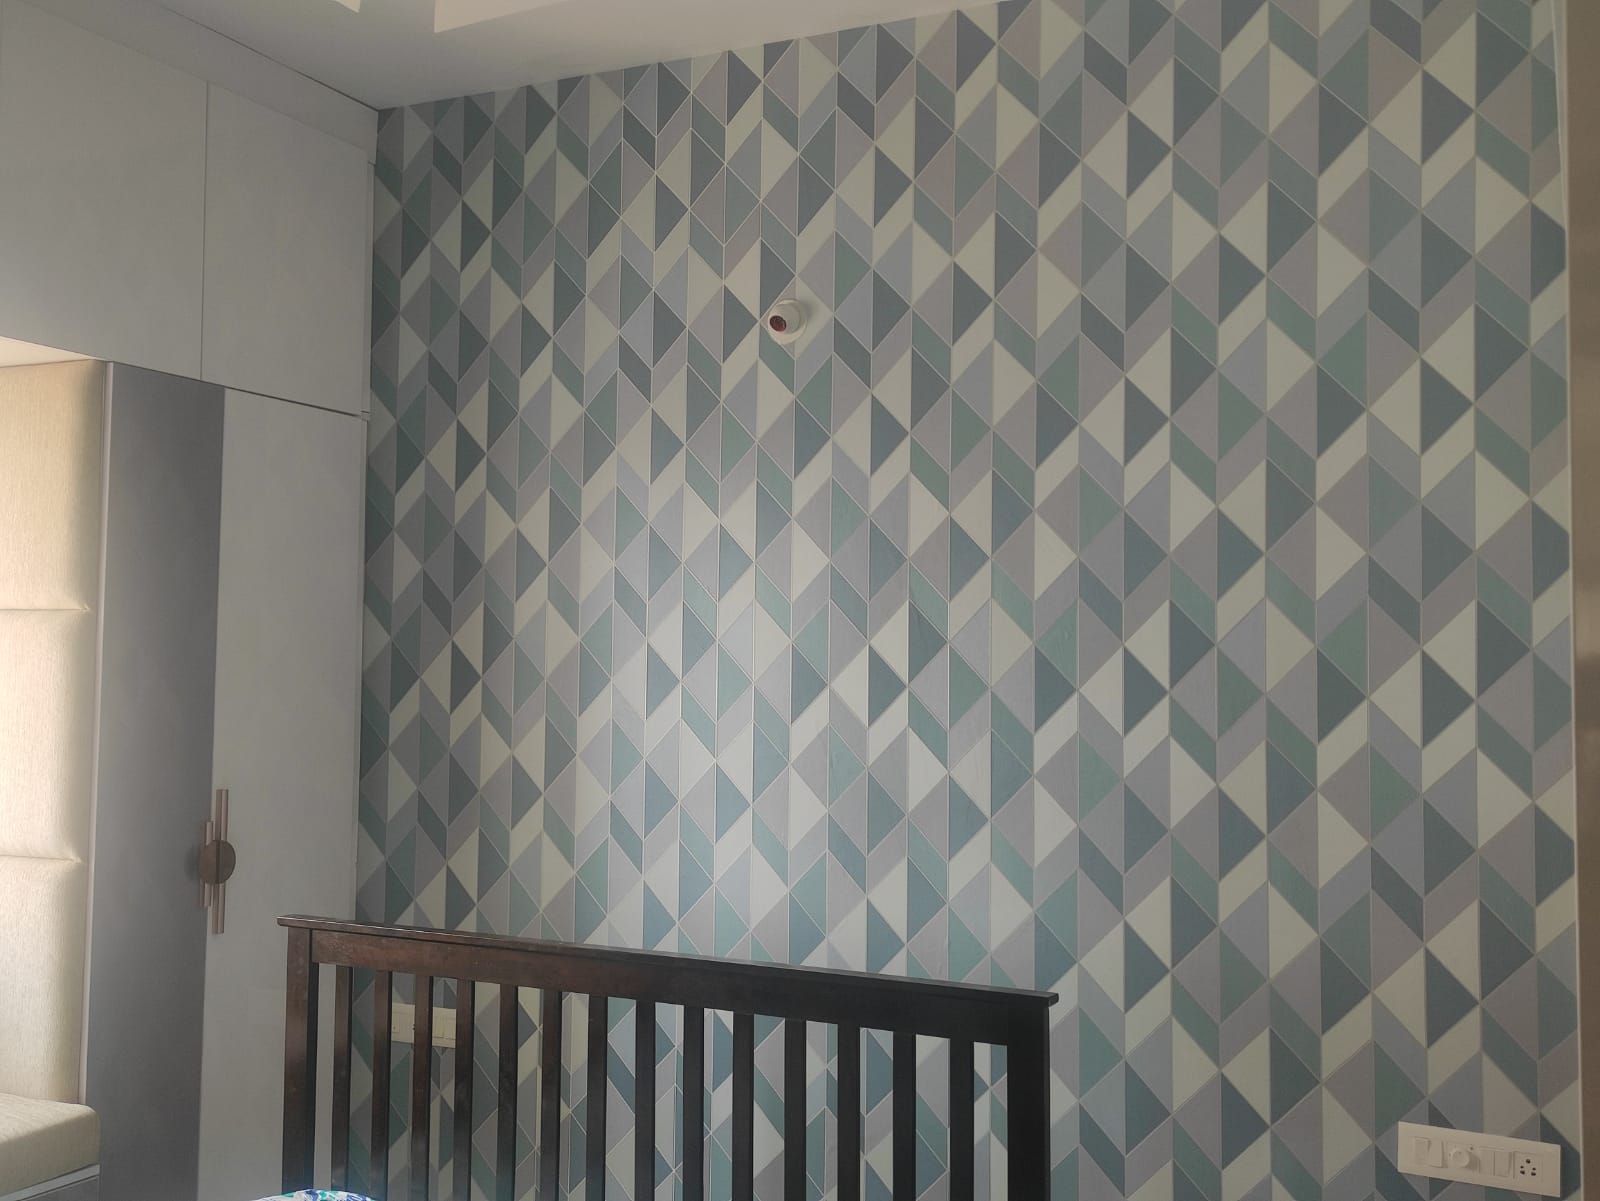 House Wallpaper vs Wall Texture vs Stencil Painting. Differences